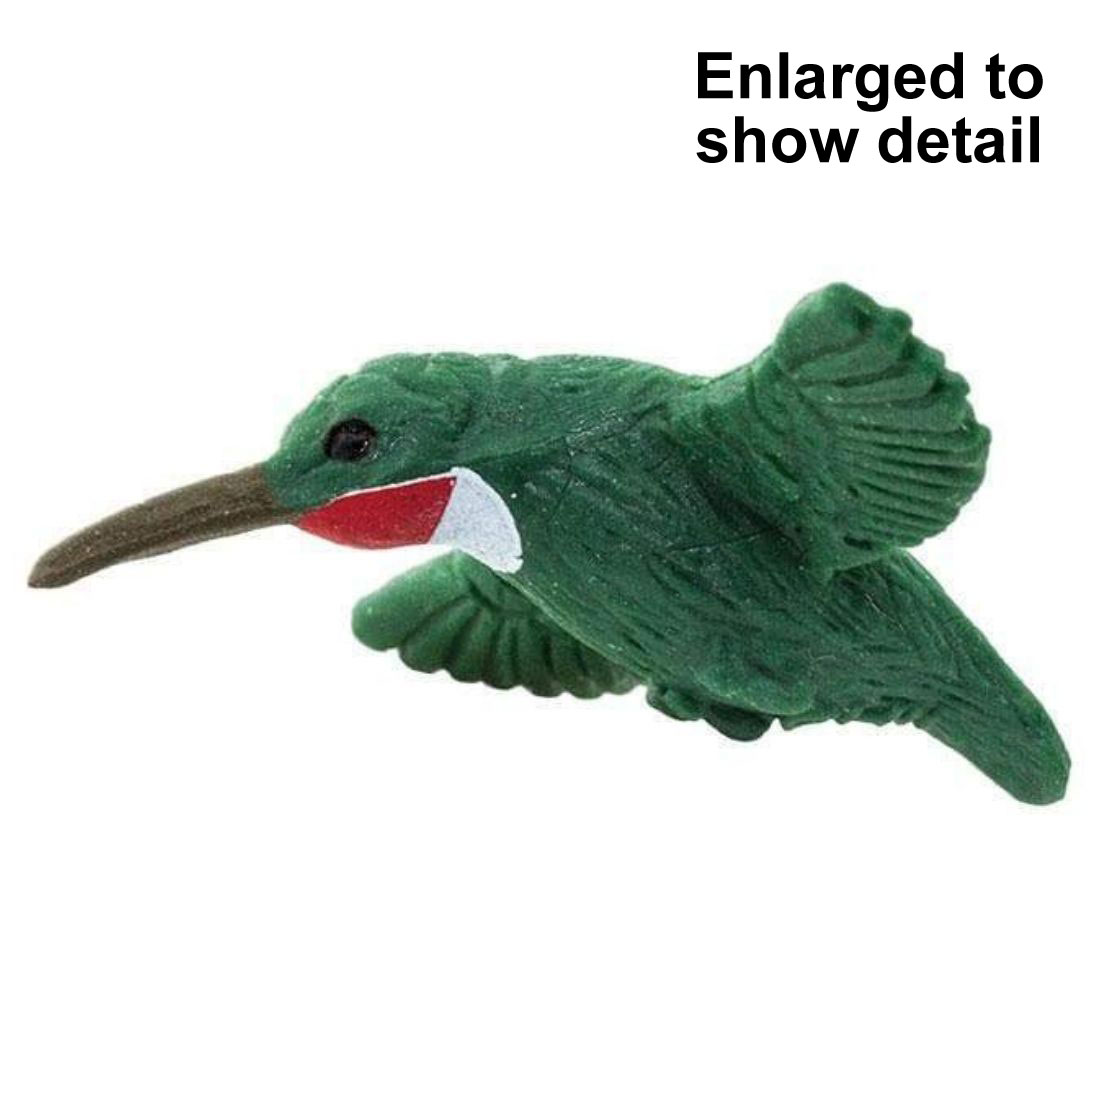 Hummingbird Mini Figurine with the text Enlarged to Show Detail